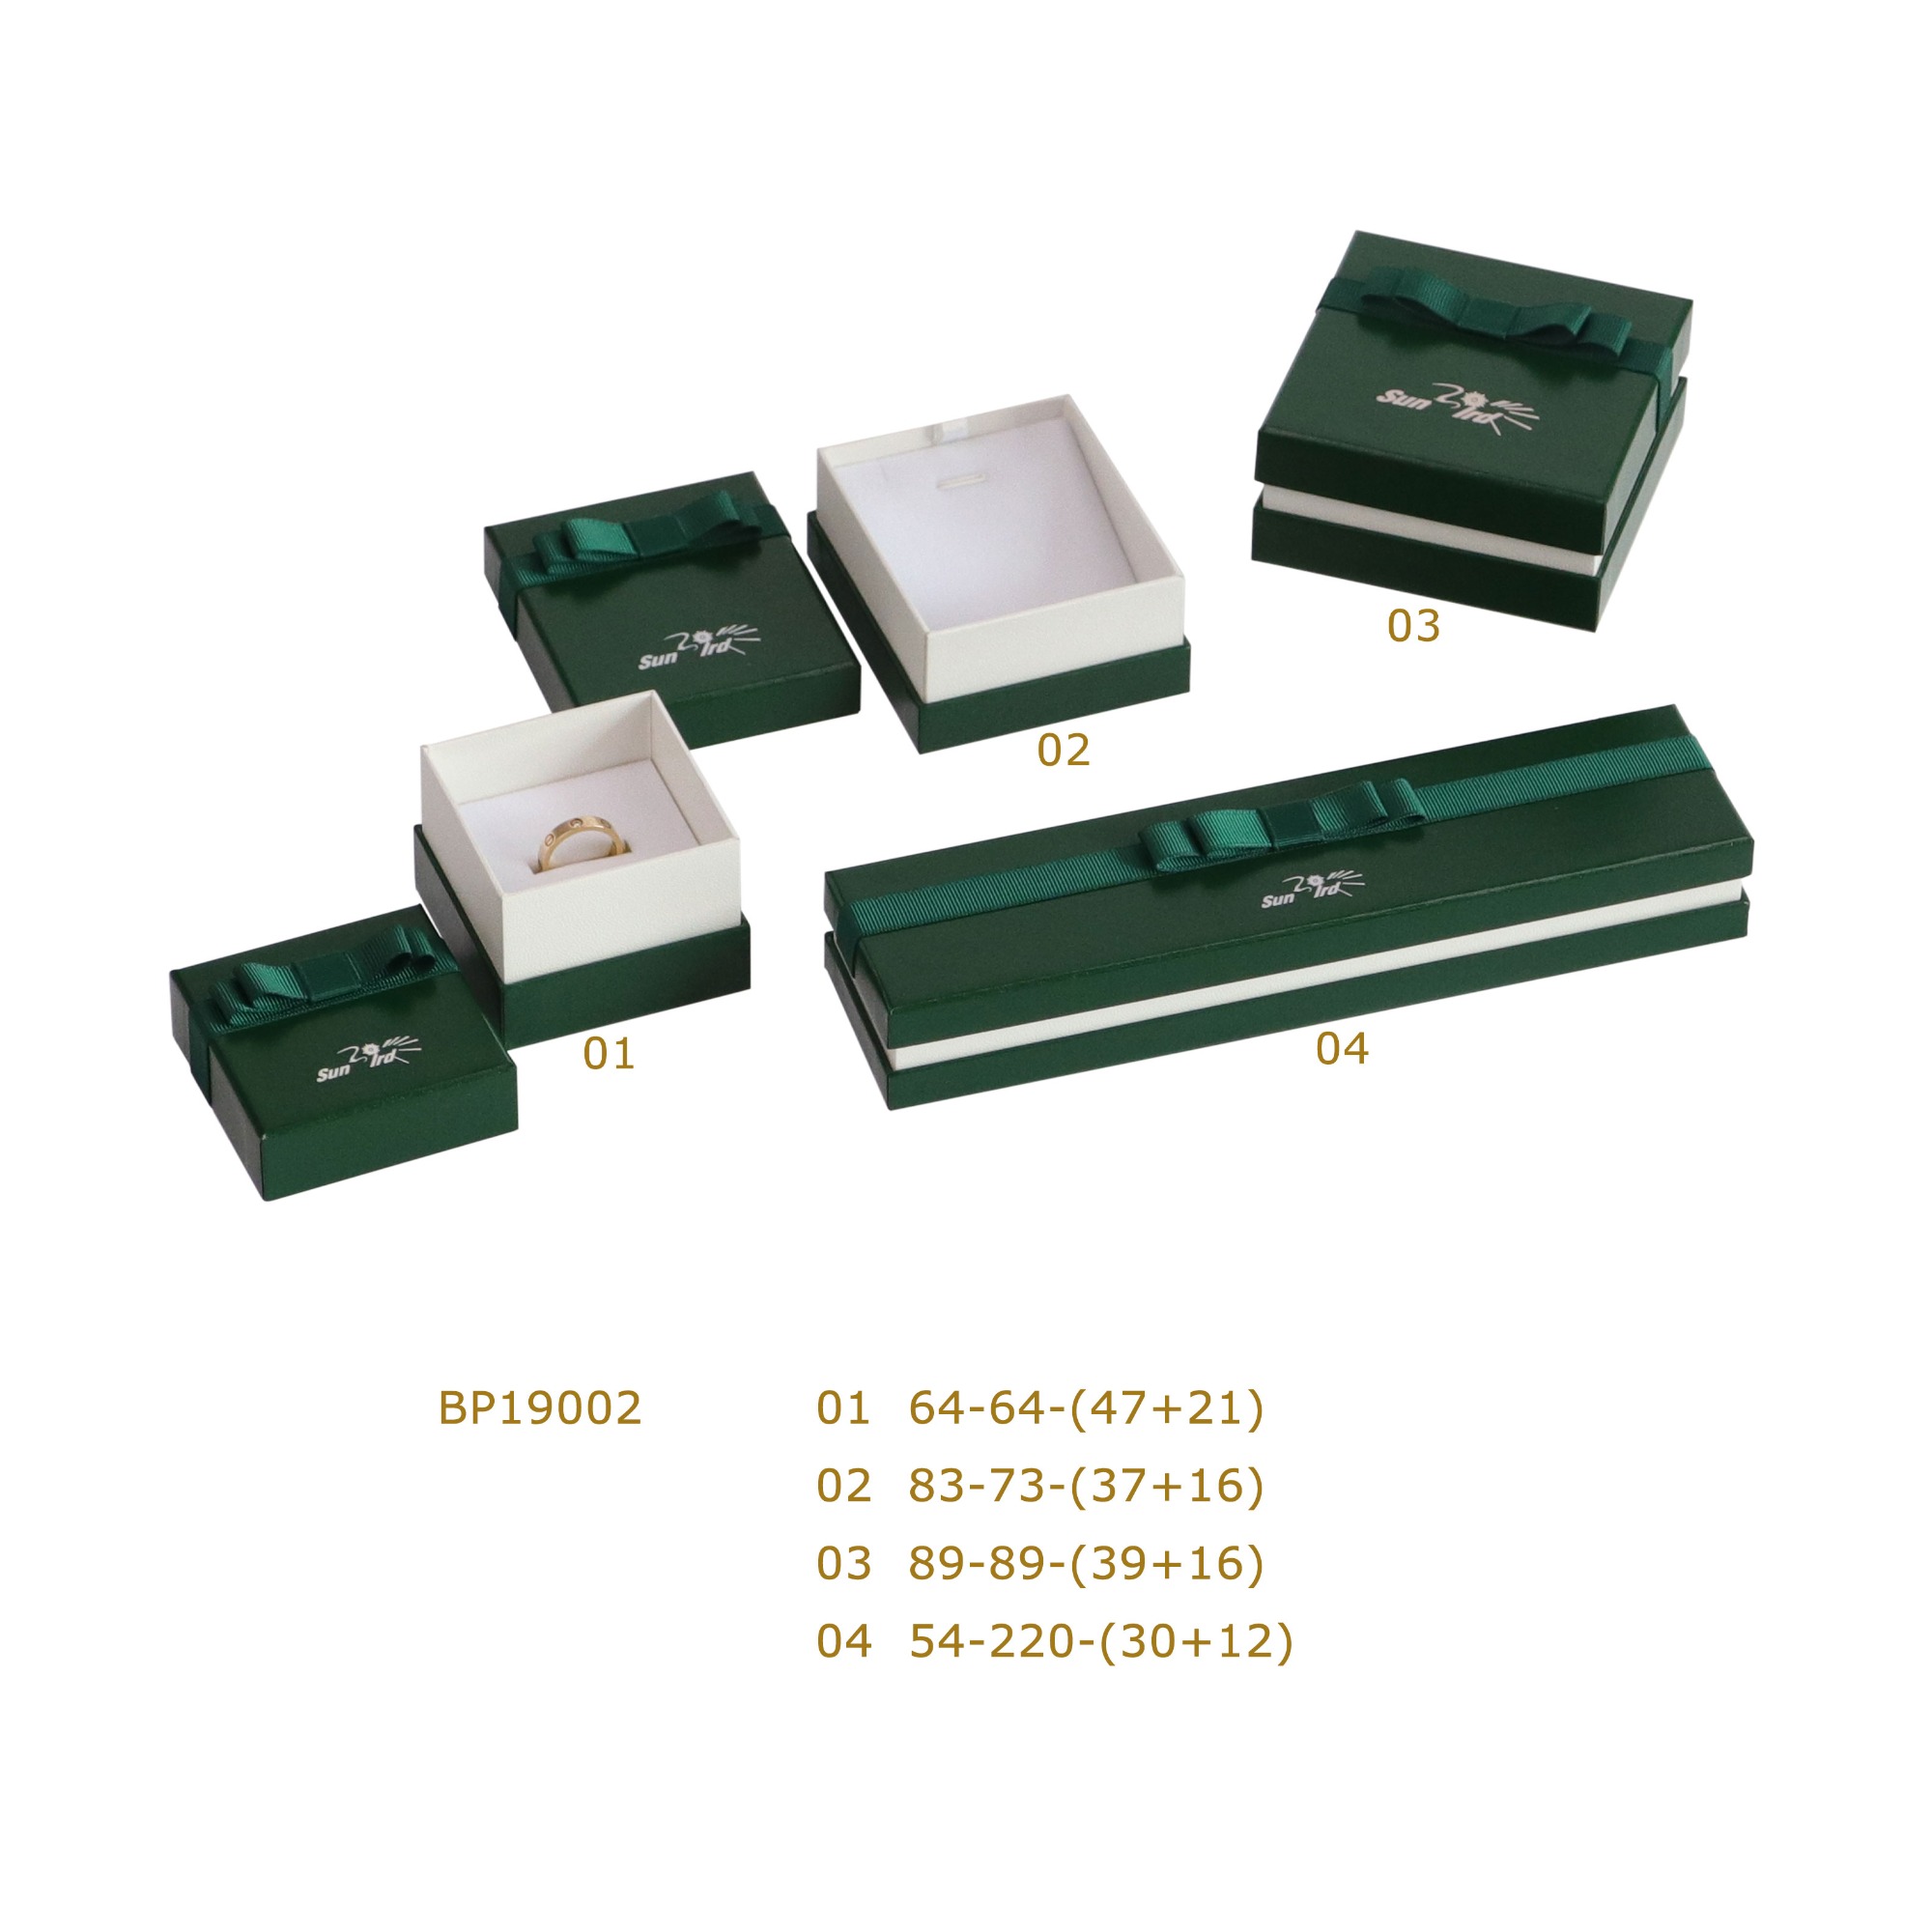 BP19002 Low Price Promotion Exquisite Paper Jewelry Packaging Boxes Set